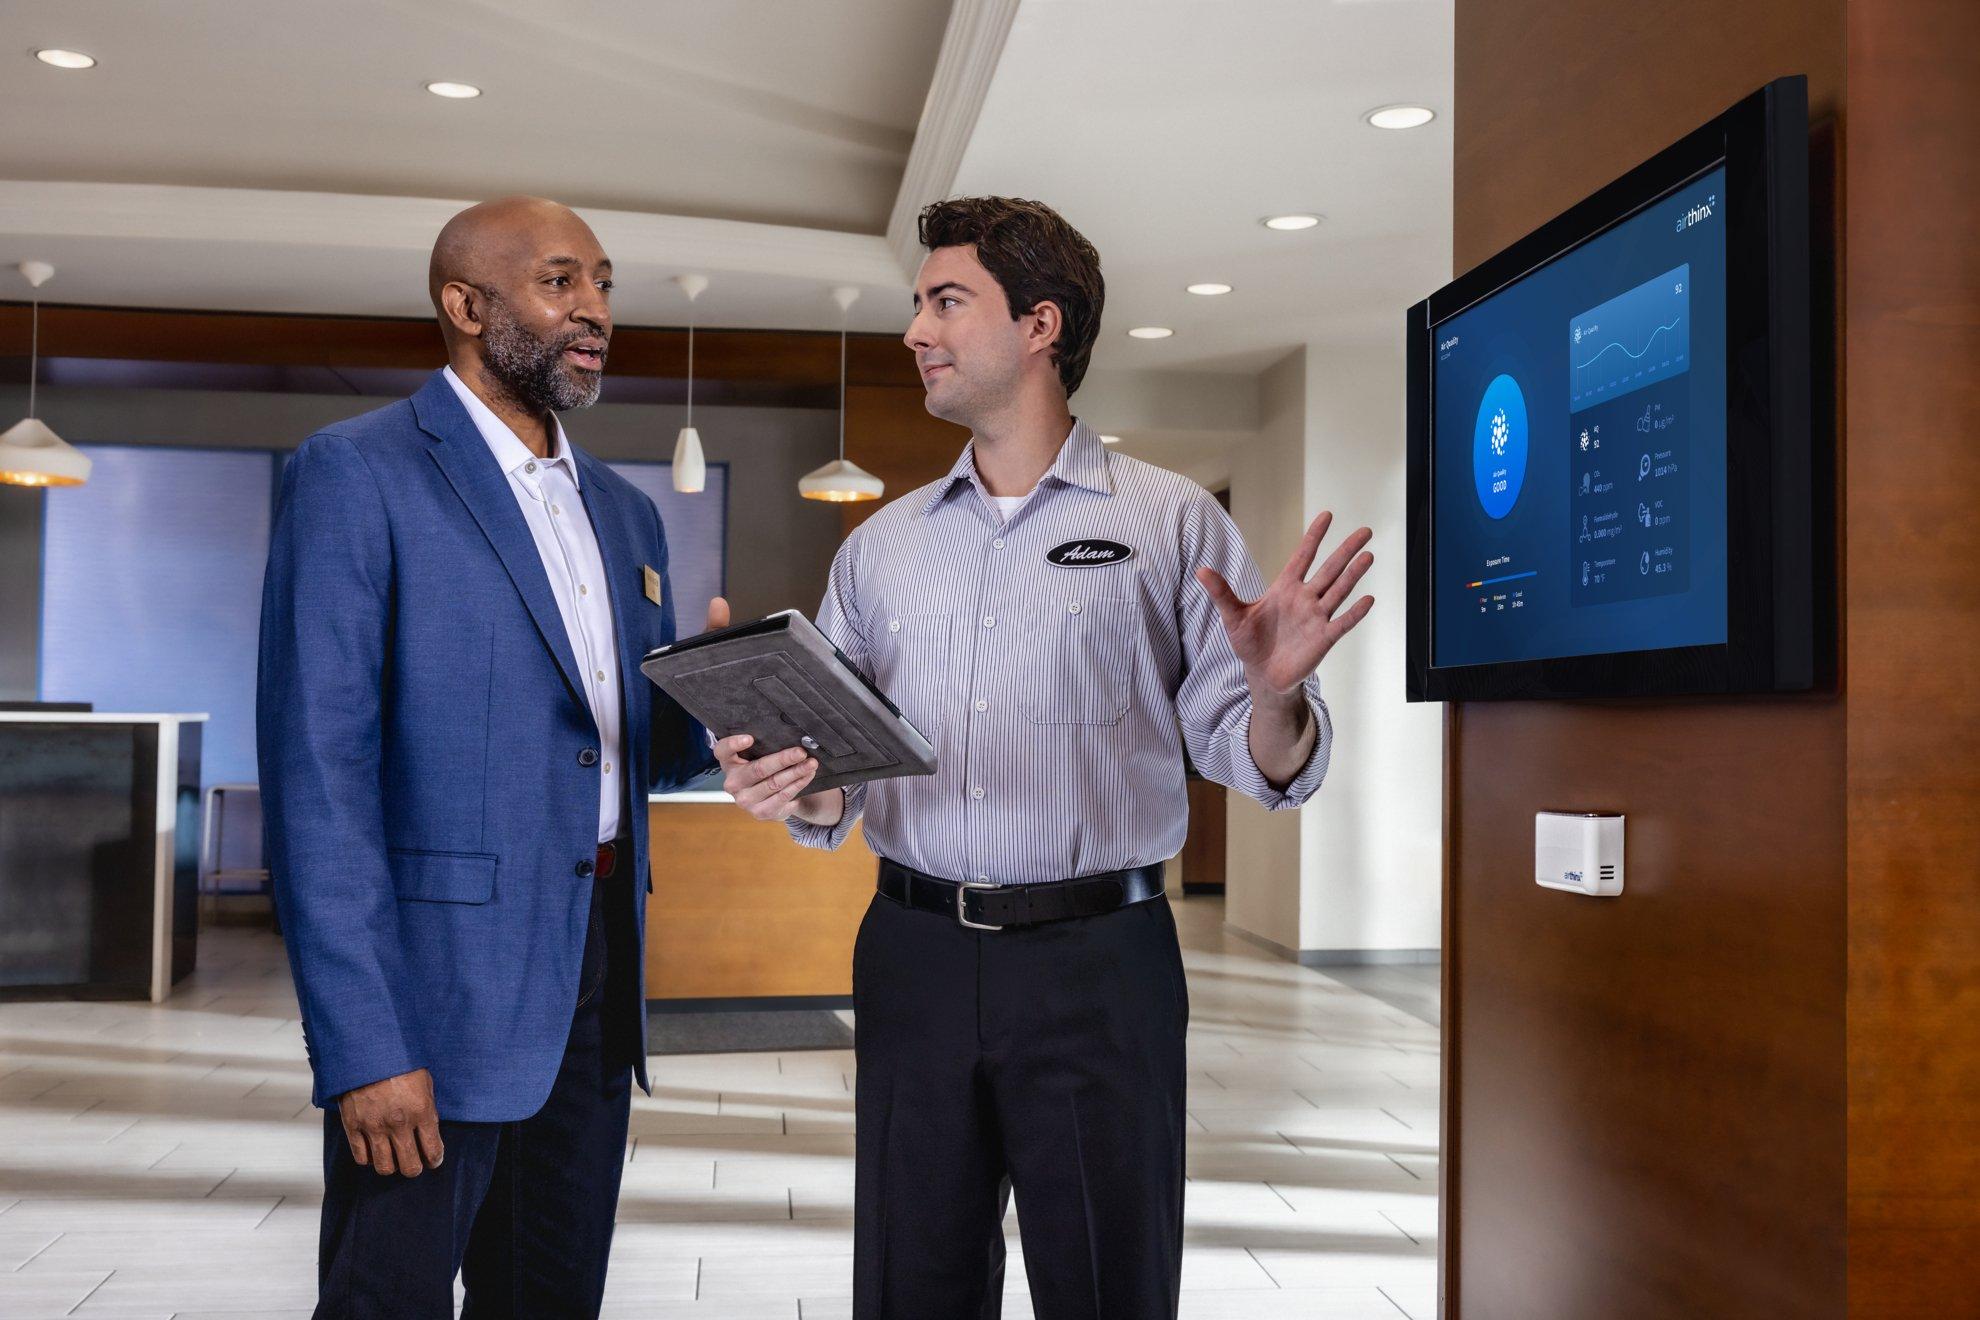 In a hotel lobby, an HVAC technician speaks with a hotel executive in front of an IAQ monitoring screen.